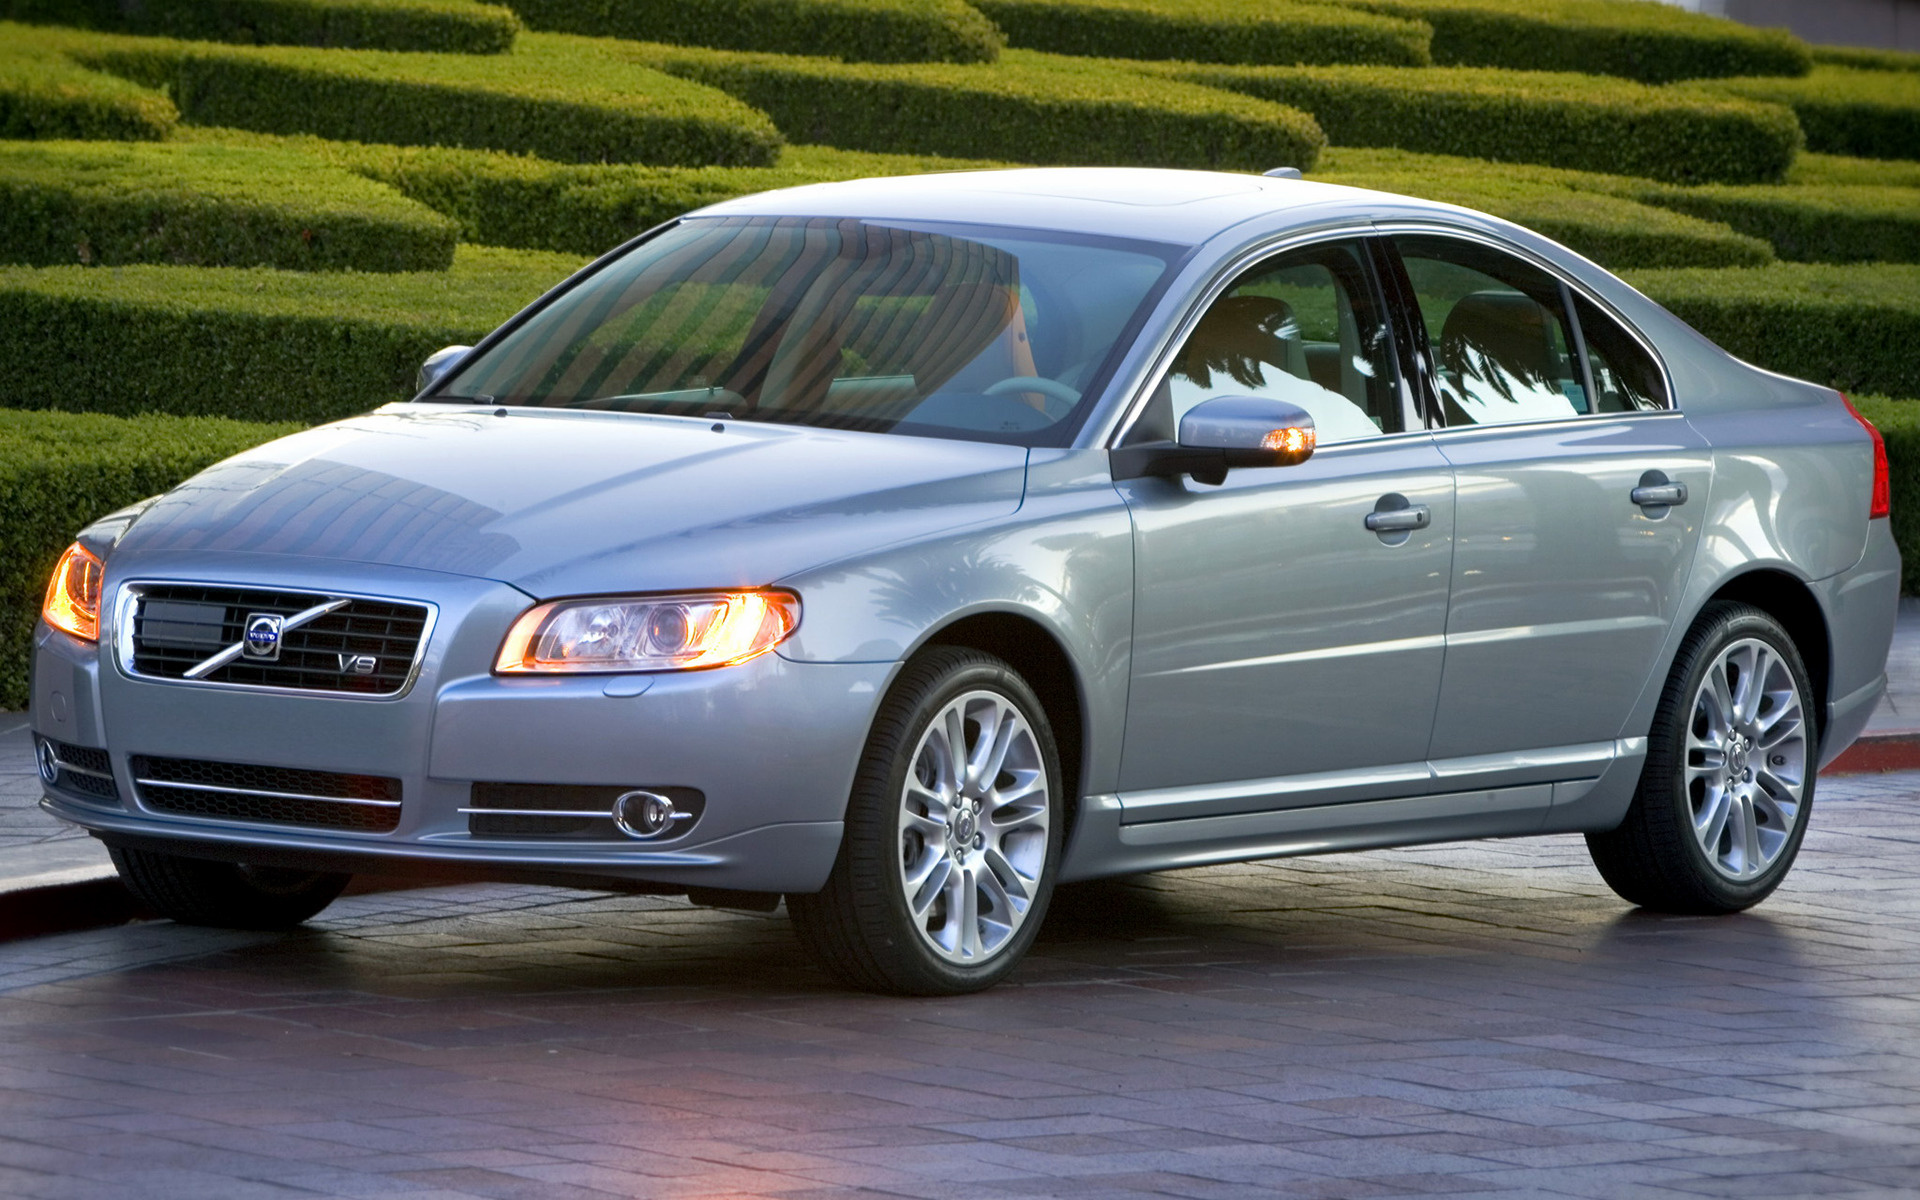 2007 Volvo S80 V8 (US) - Wallpapers and HD Images | Car Pixel